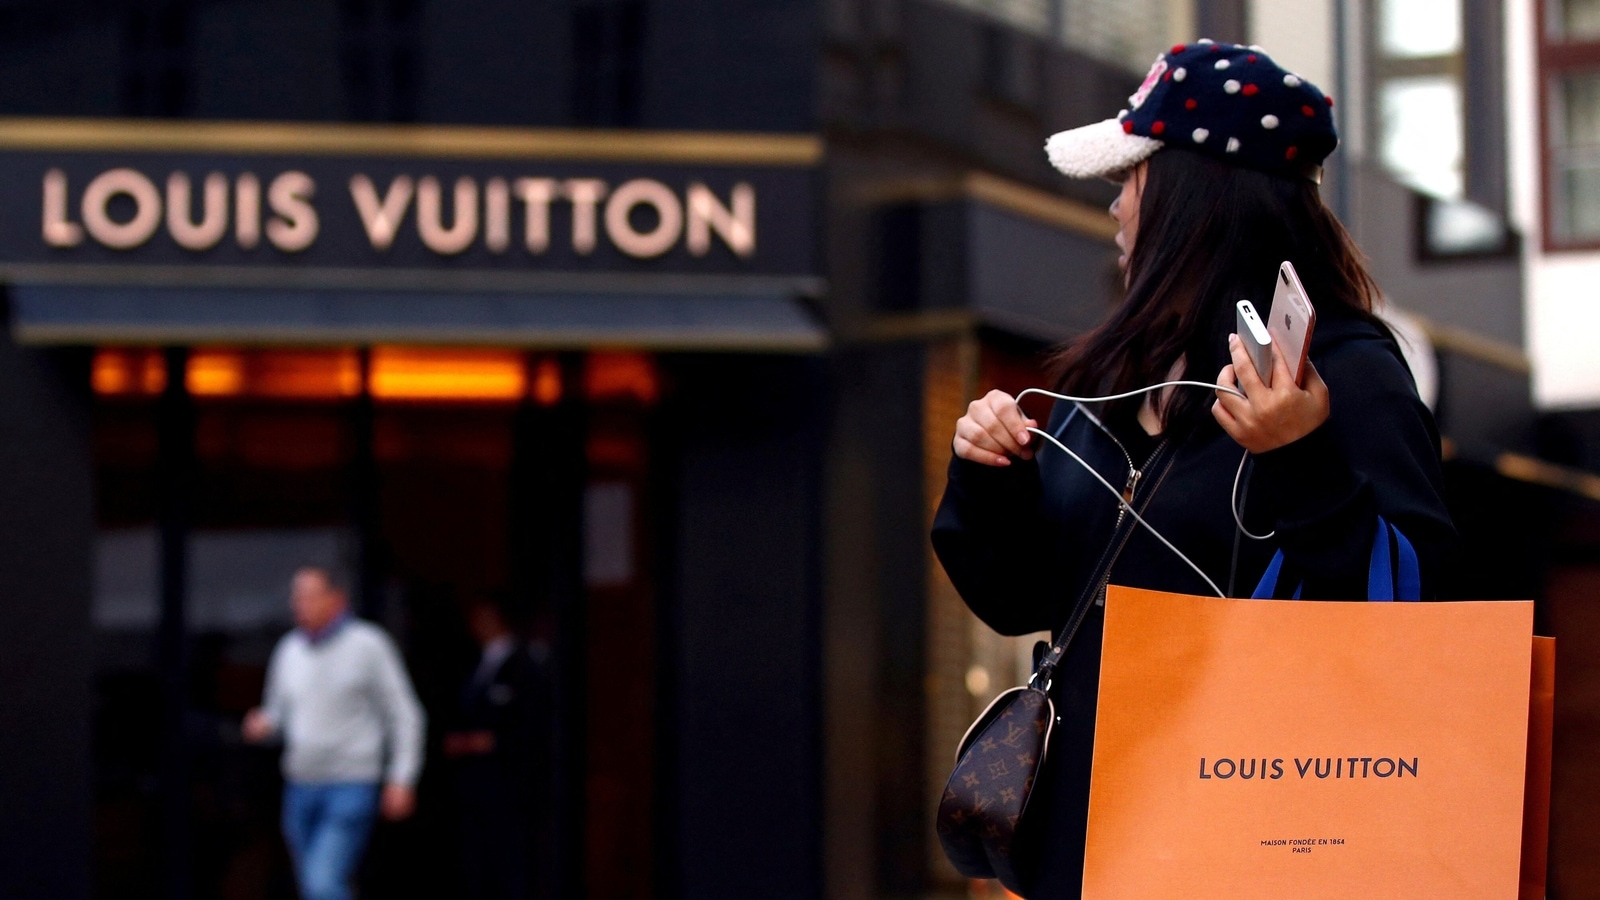 Louis Vuitton - 1854: The first store is opened in Paris. This